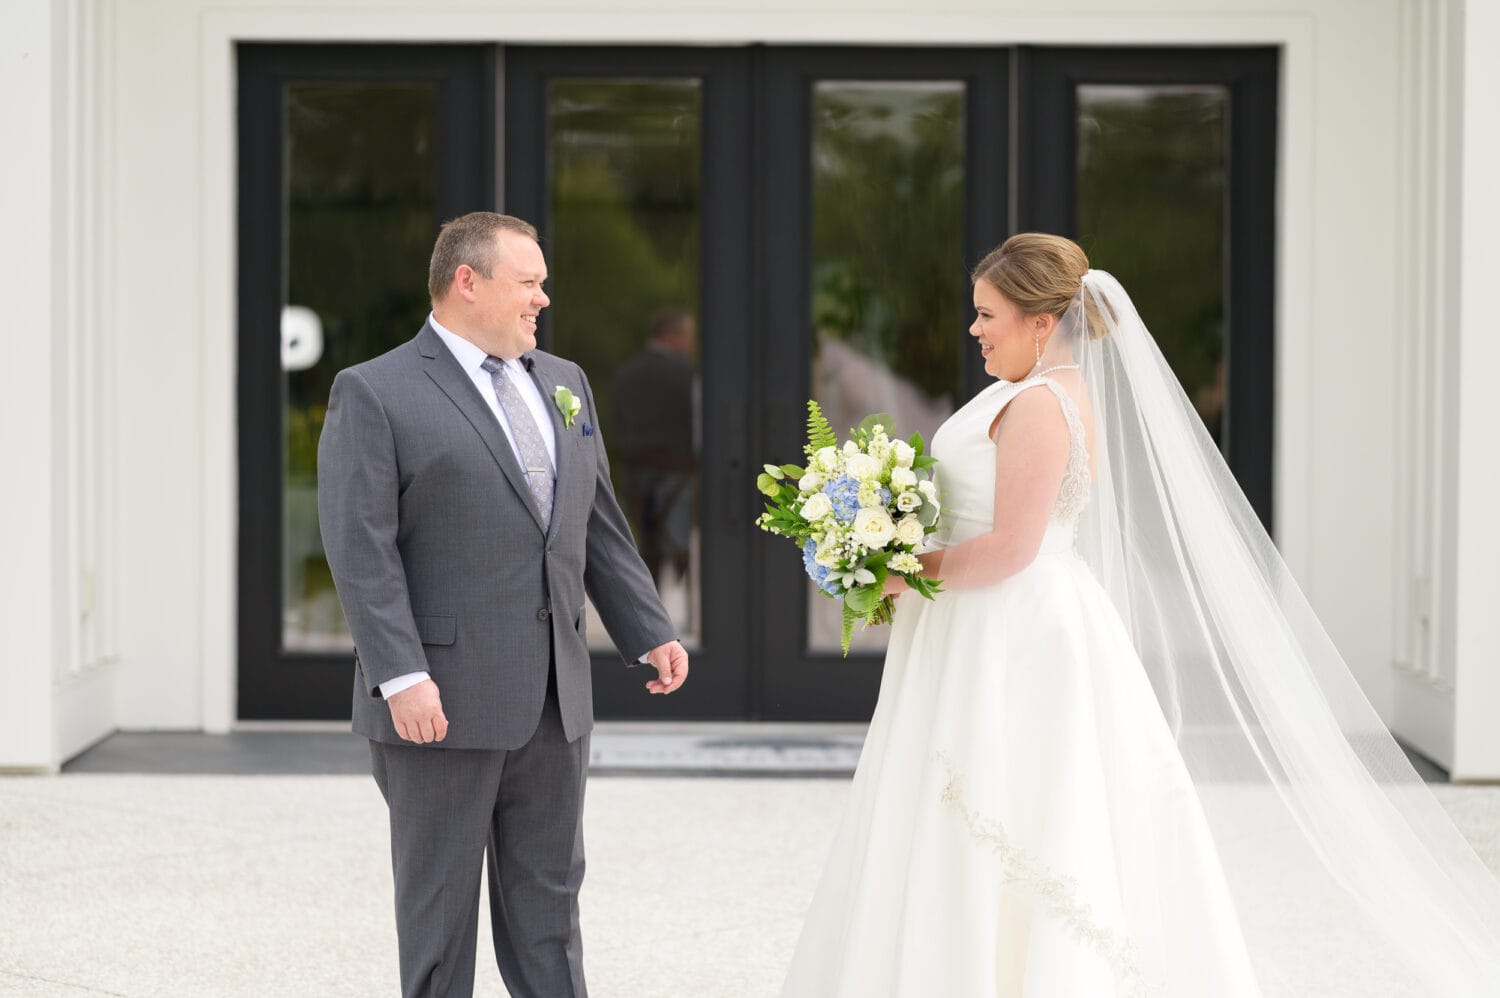 First look with bride and father - The Venue at White Oaks Farm